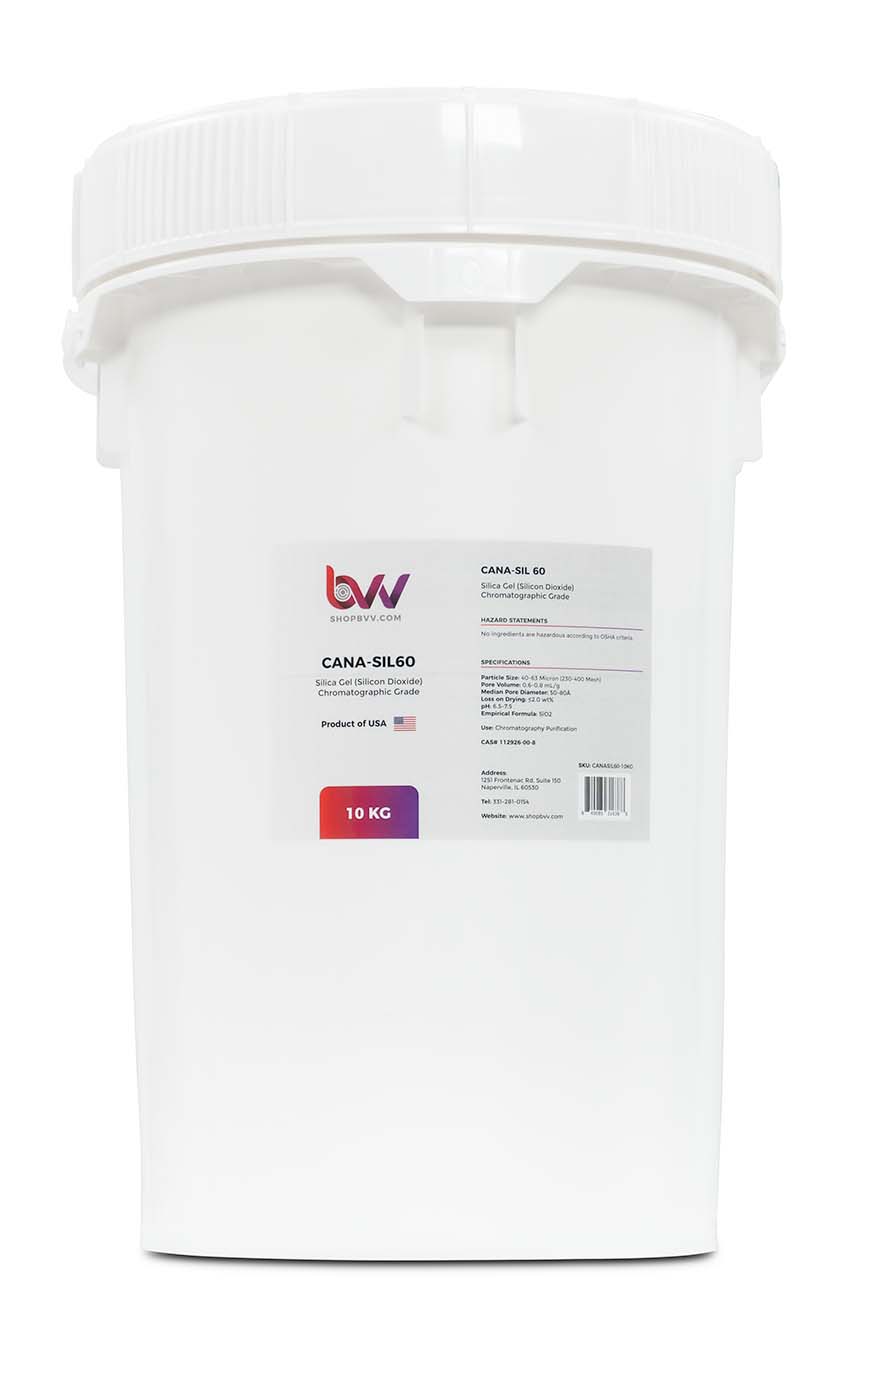 CANA-SIL60™ Silica Gel 60A Chromatographic Grade 40-63 micron (230-400 Mesh) New Products BVV 10KG 